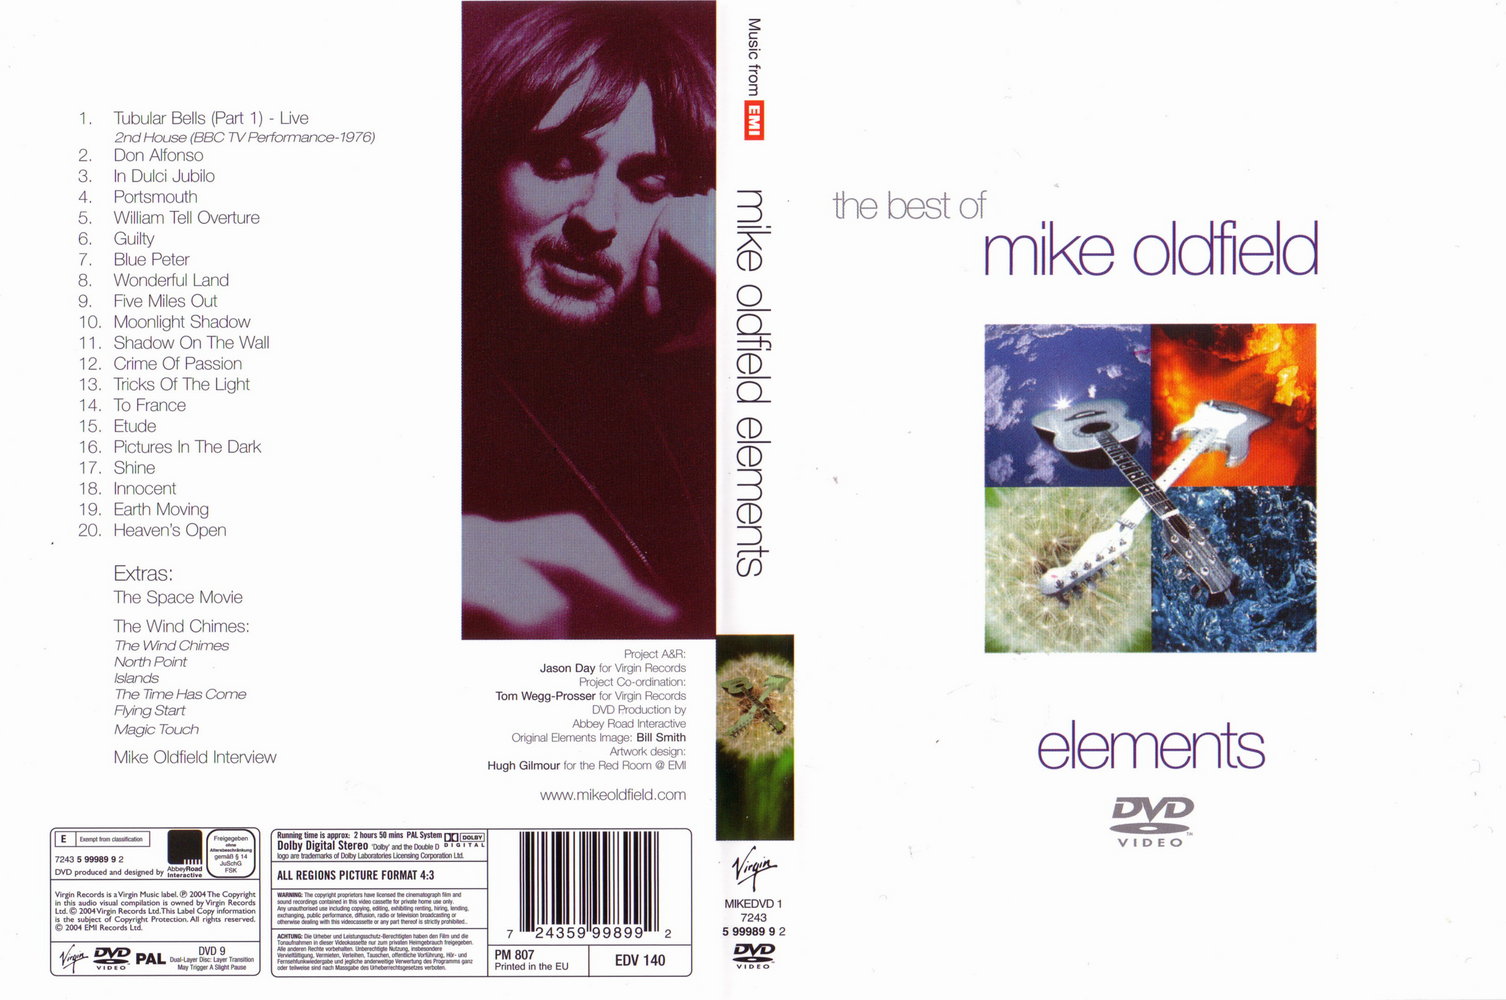 Jaquette DVD Mike Oldfield - Elements